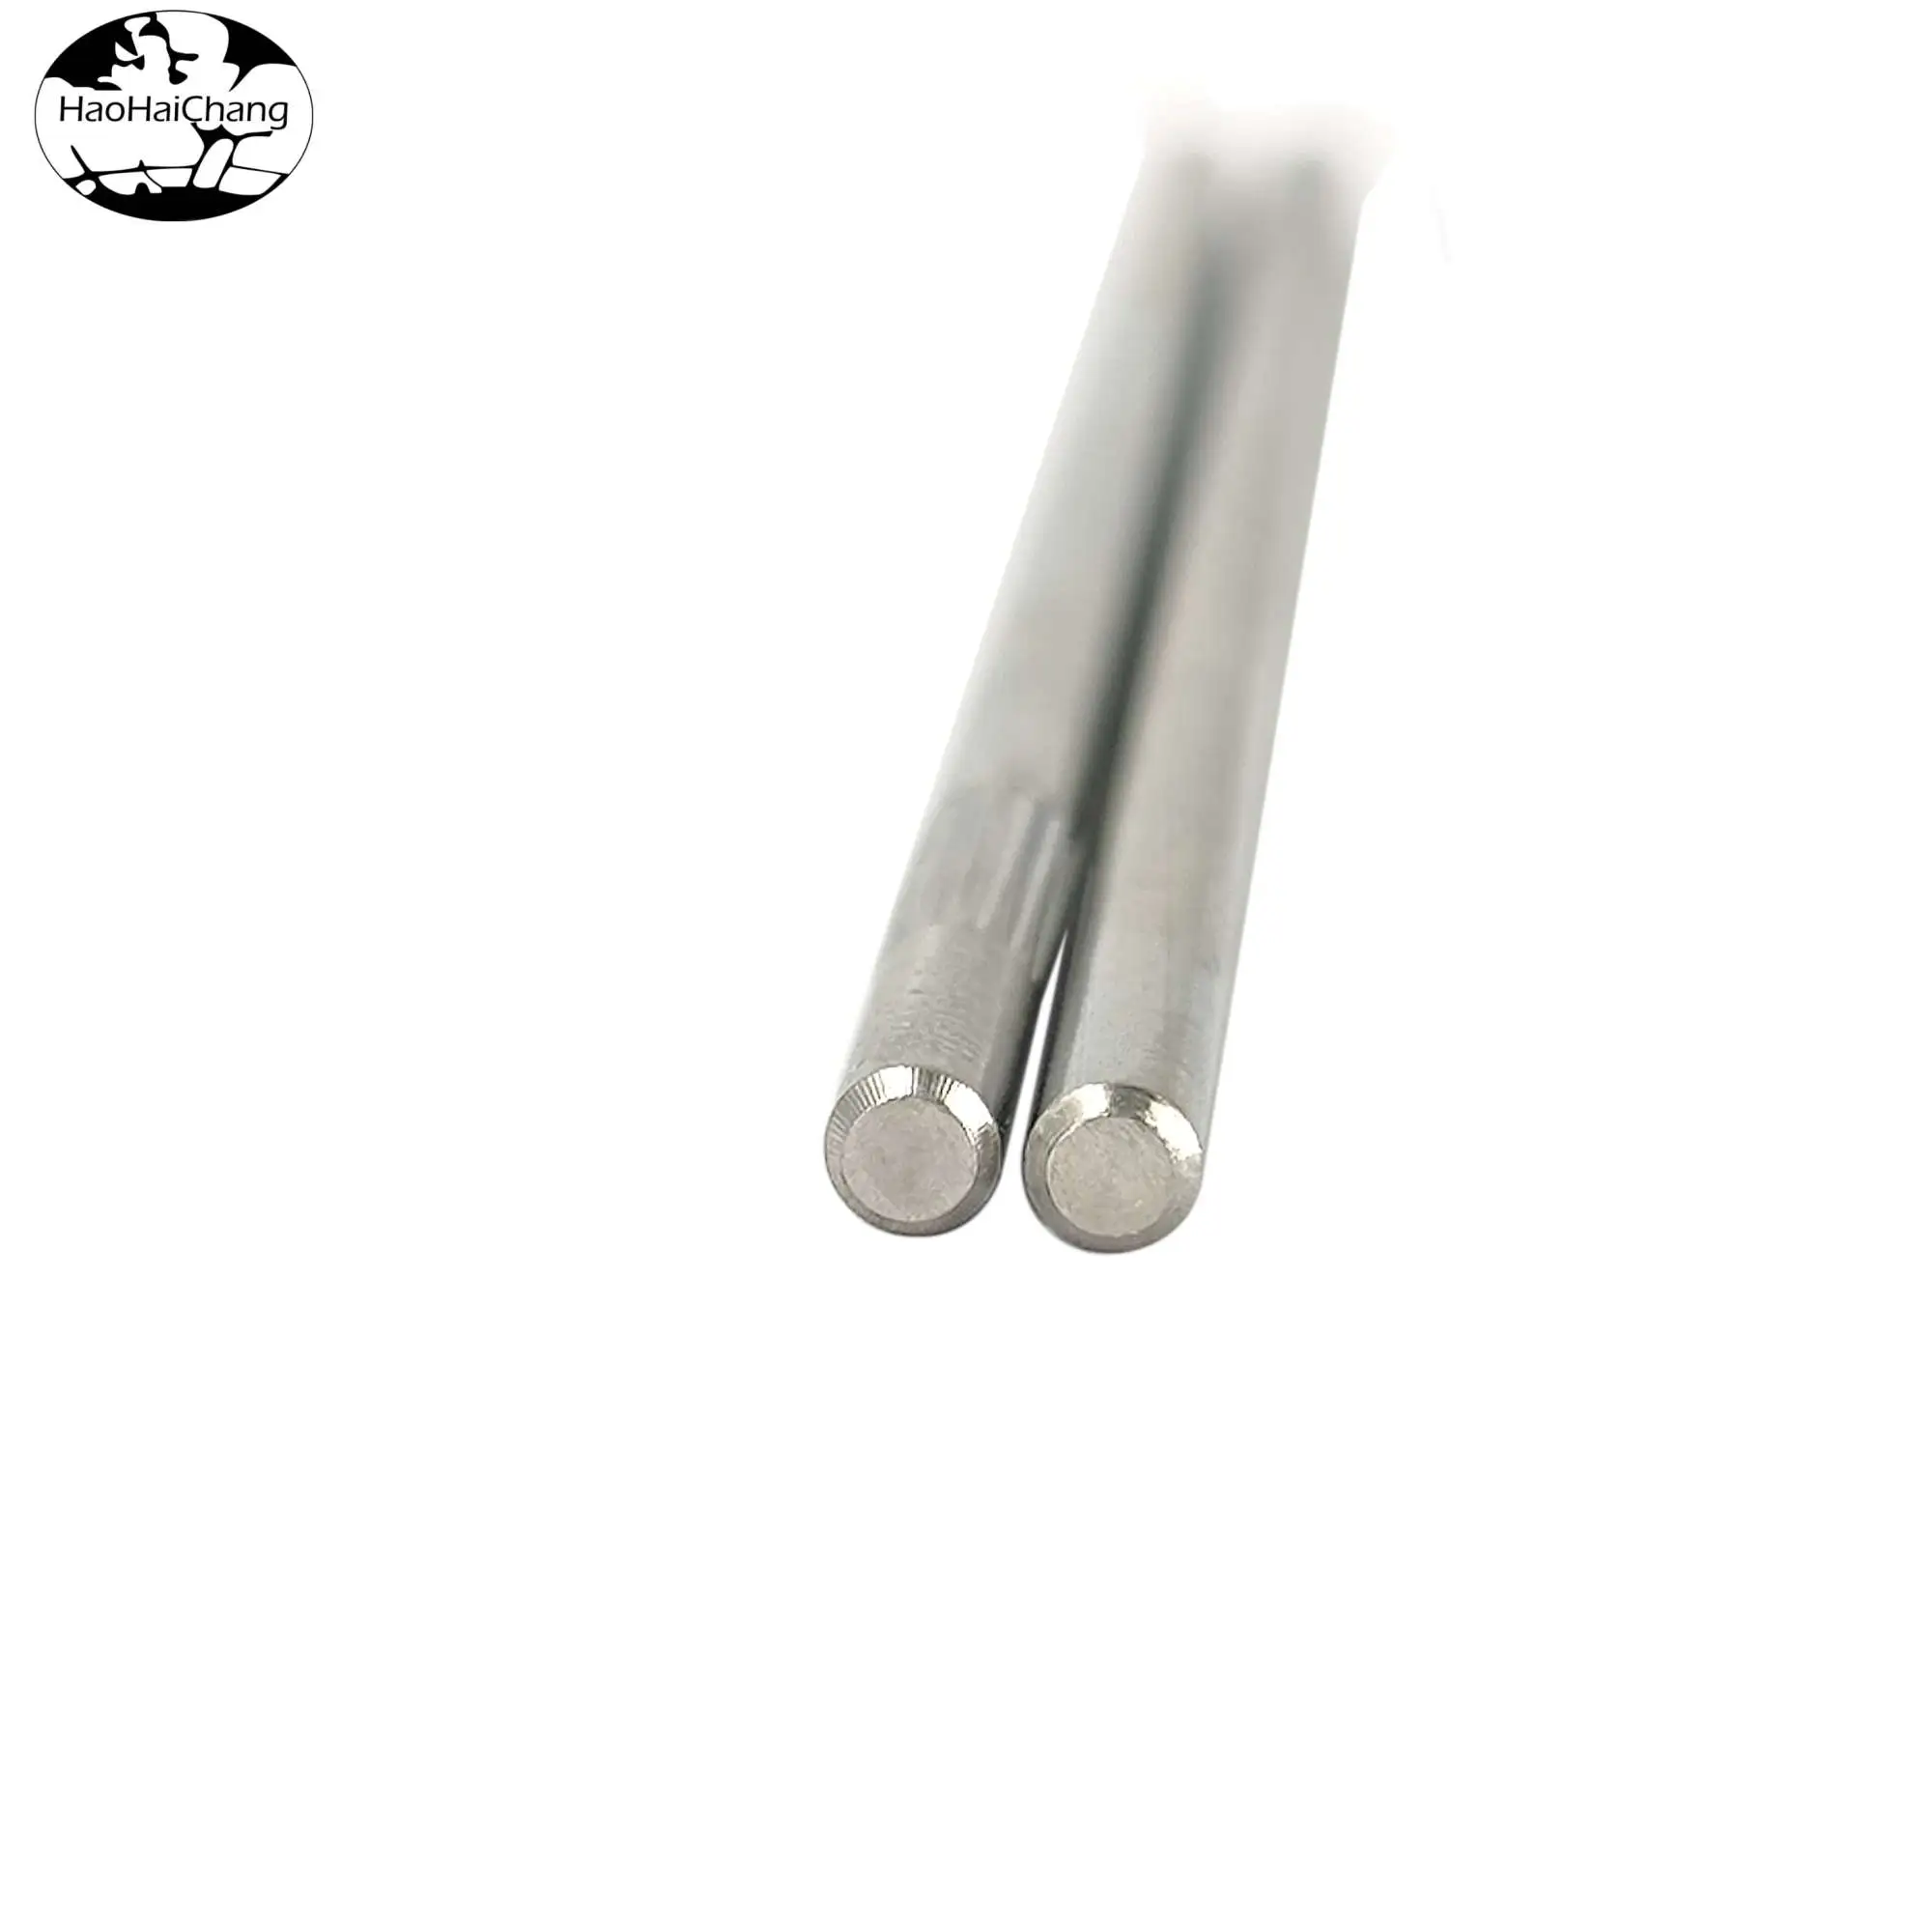 HHC-675 Knurled Cylindrical Cutting Positioning Pin End Rod